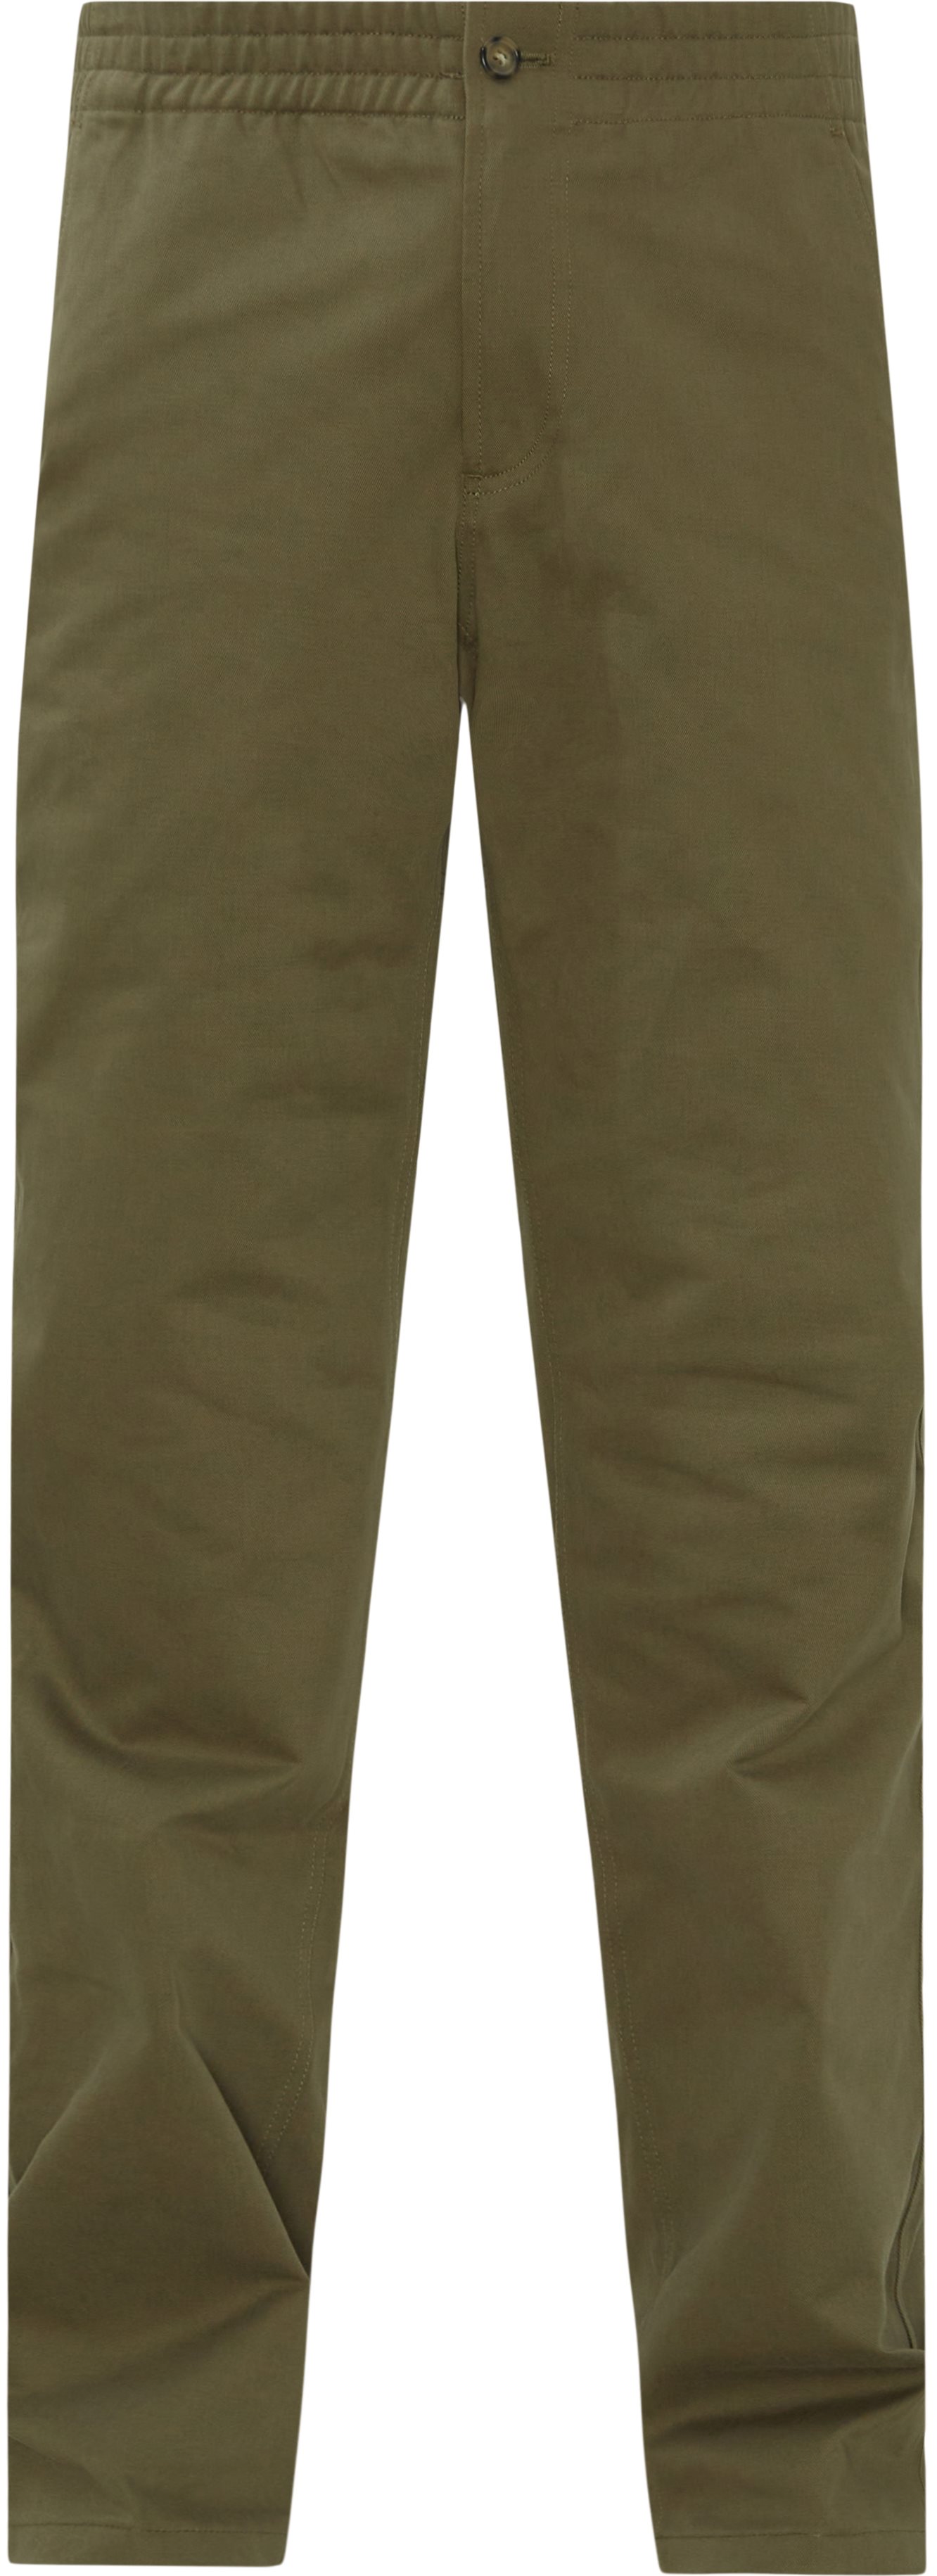 A.P.C. Trousers COGGEW-H08408 CHUCK Army